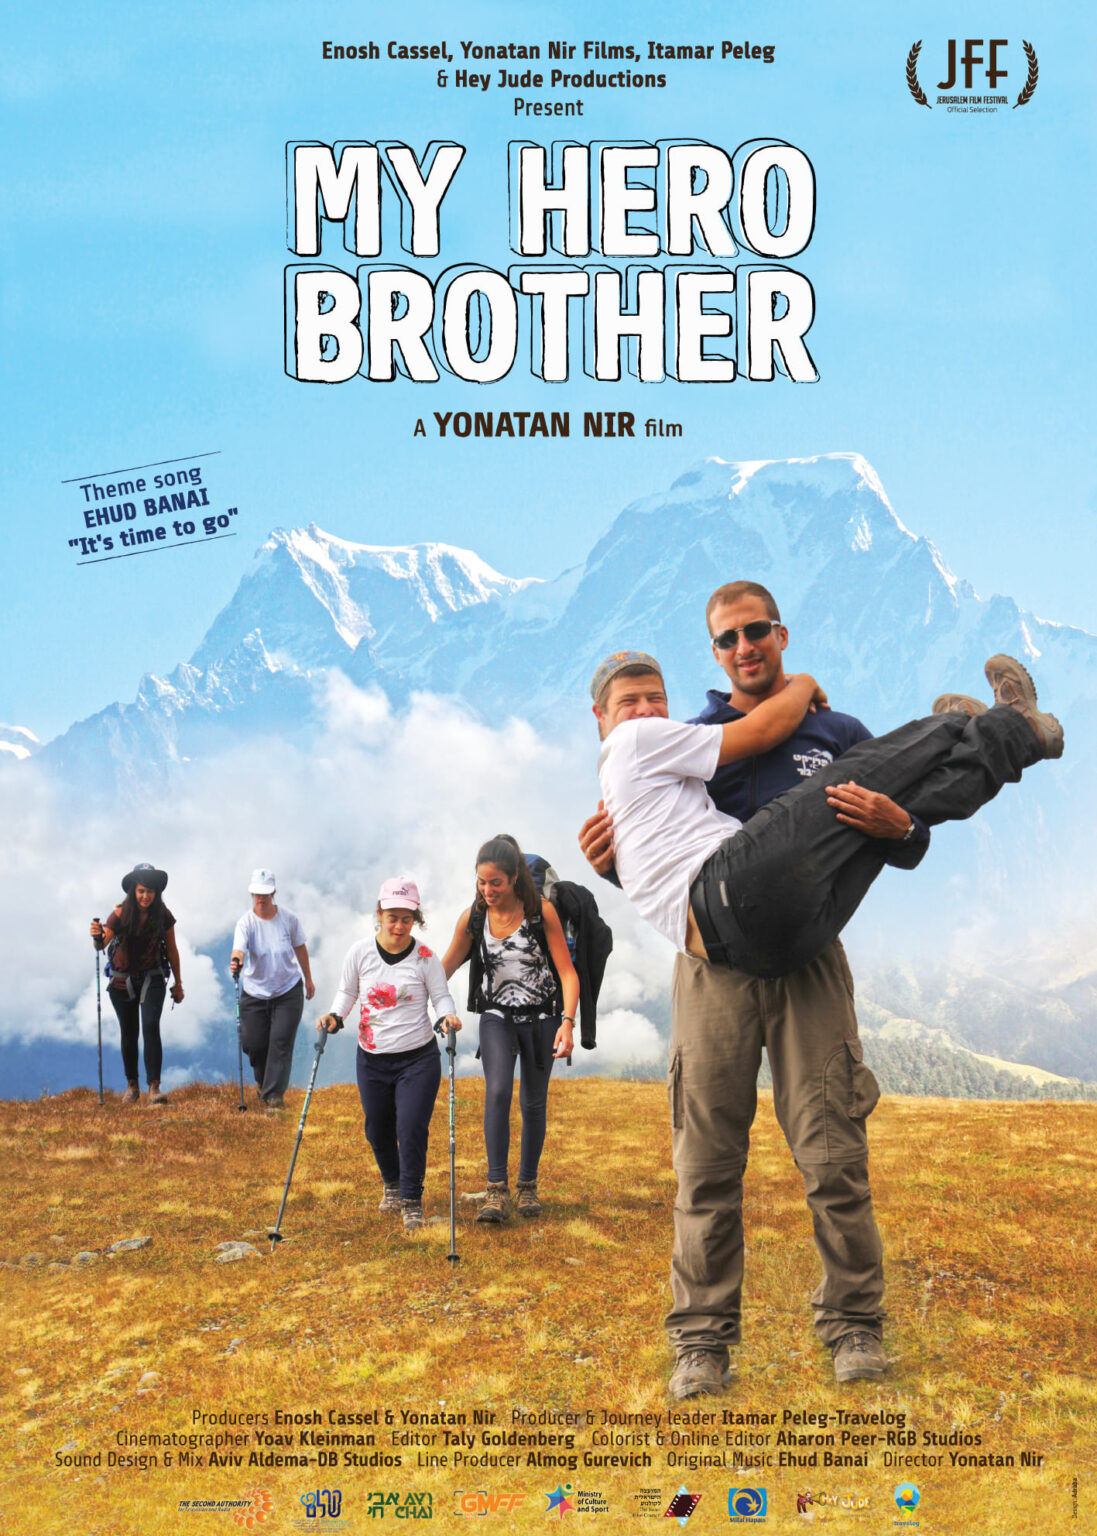 Poster for the documentary film My Hero Brother.